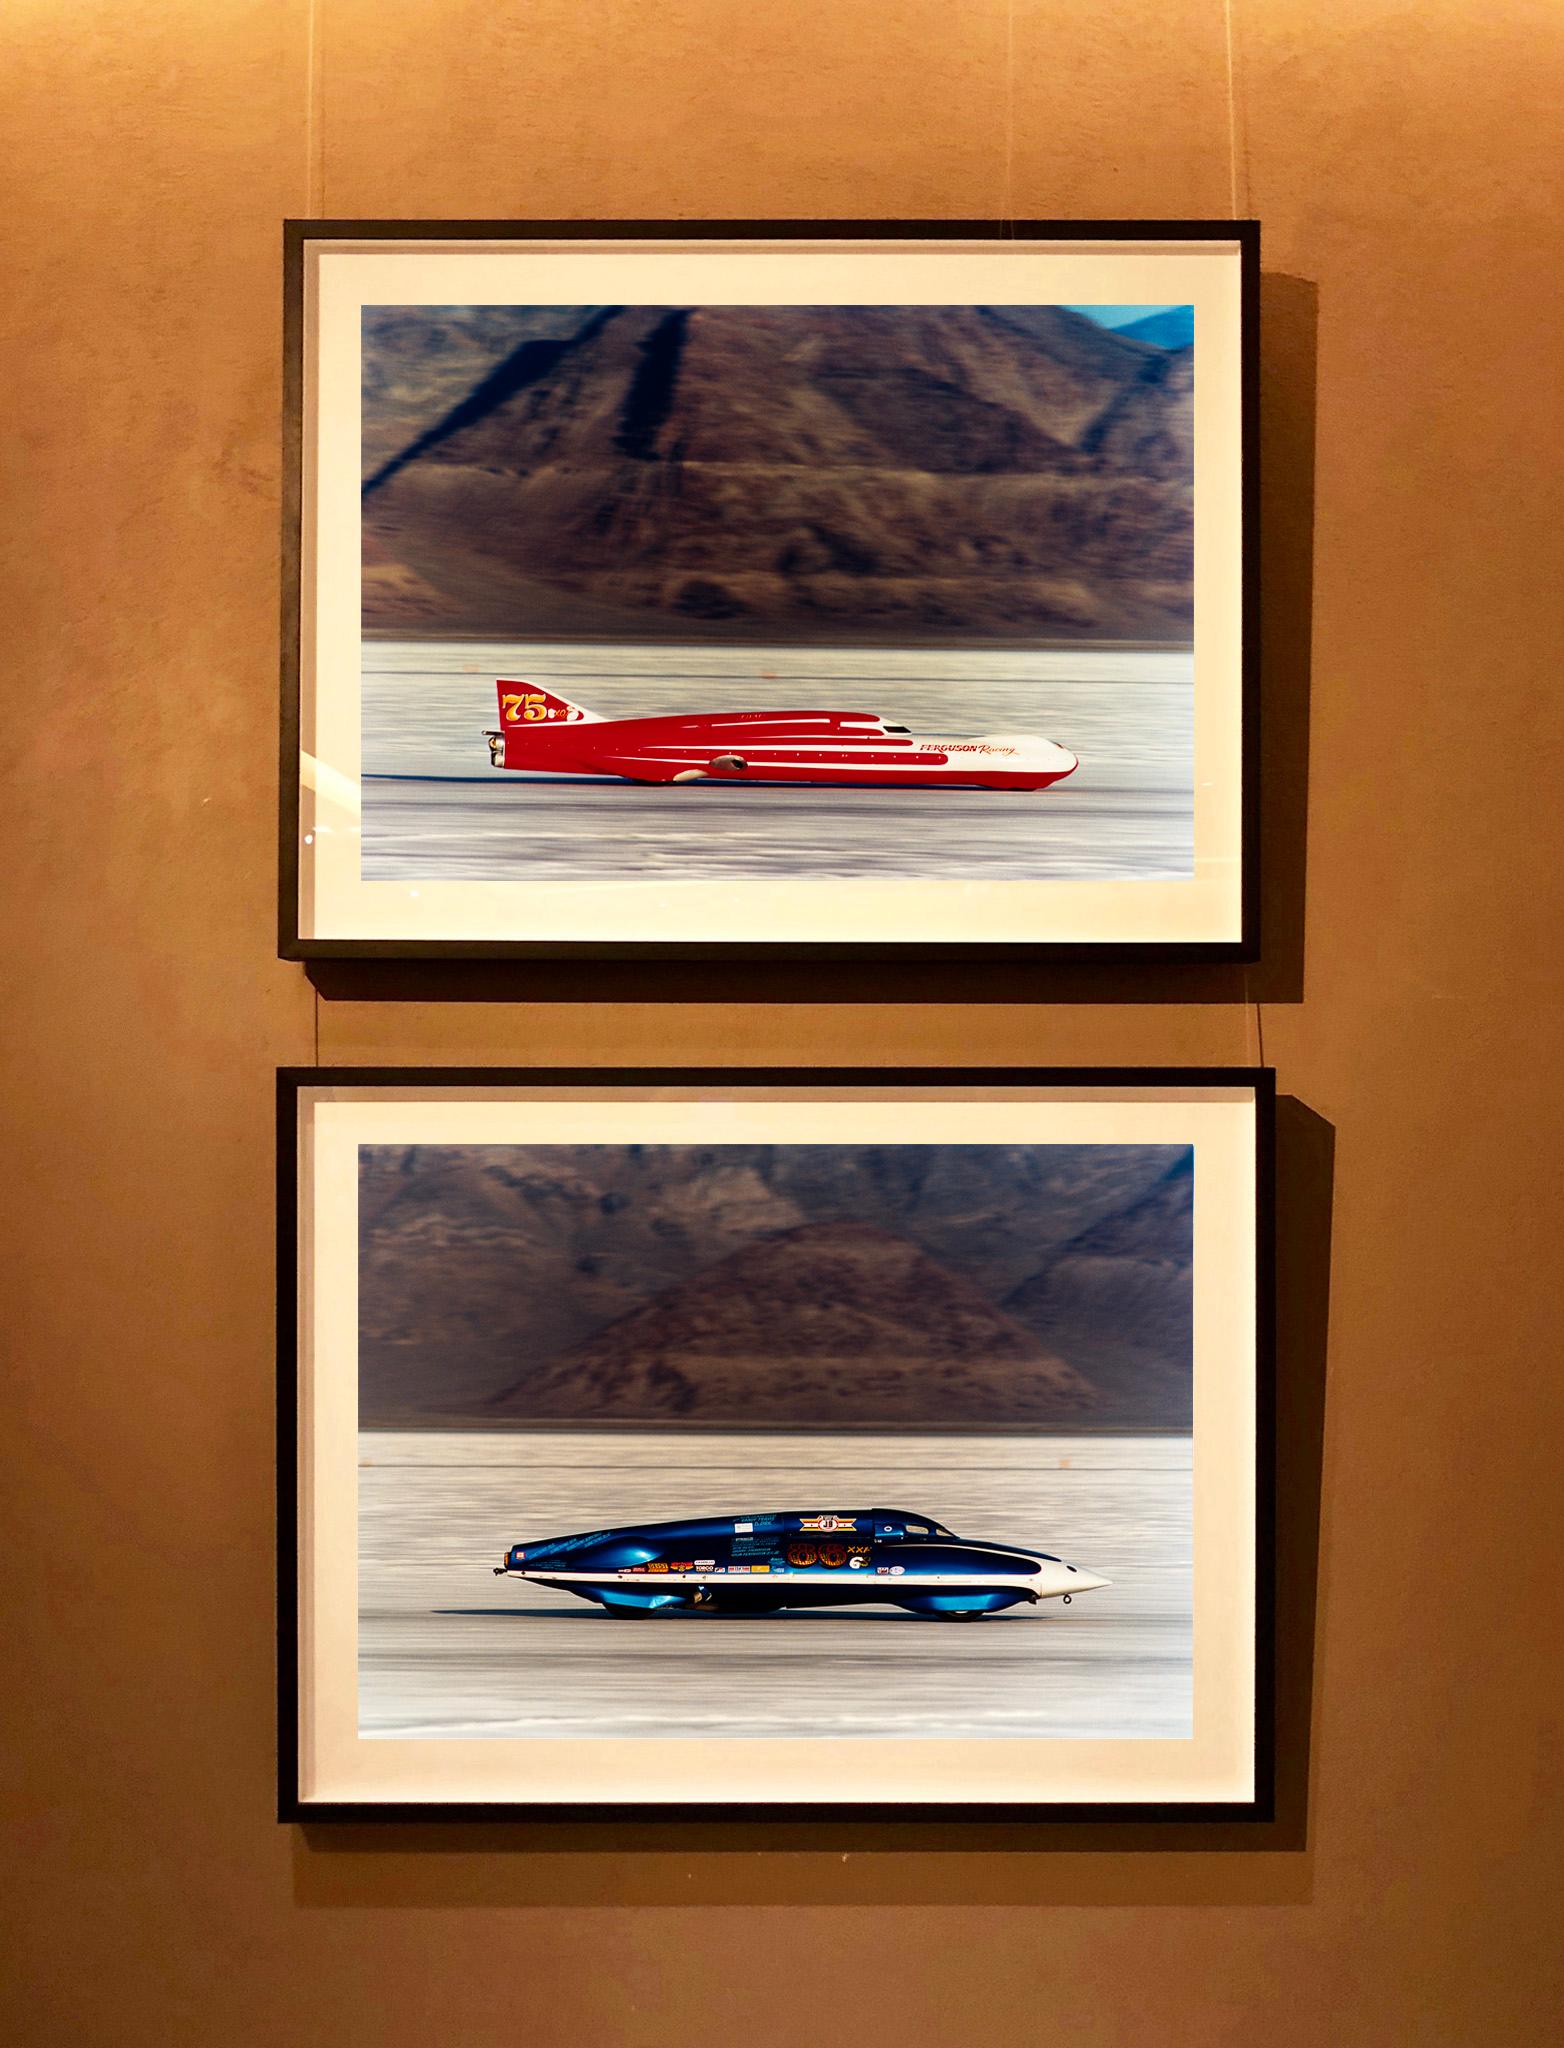 Ferguson Racing Streamliner, photograph taken in the iconic home of speed, Bonneville Salt Flats, just as the mountains contrast with the flatness, Richard Heeps captured this racing car at high speed contrasting with the still effect of the